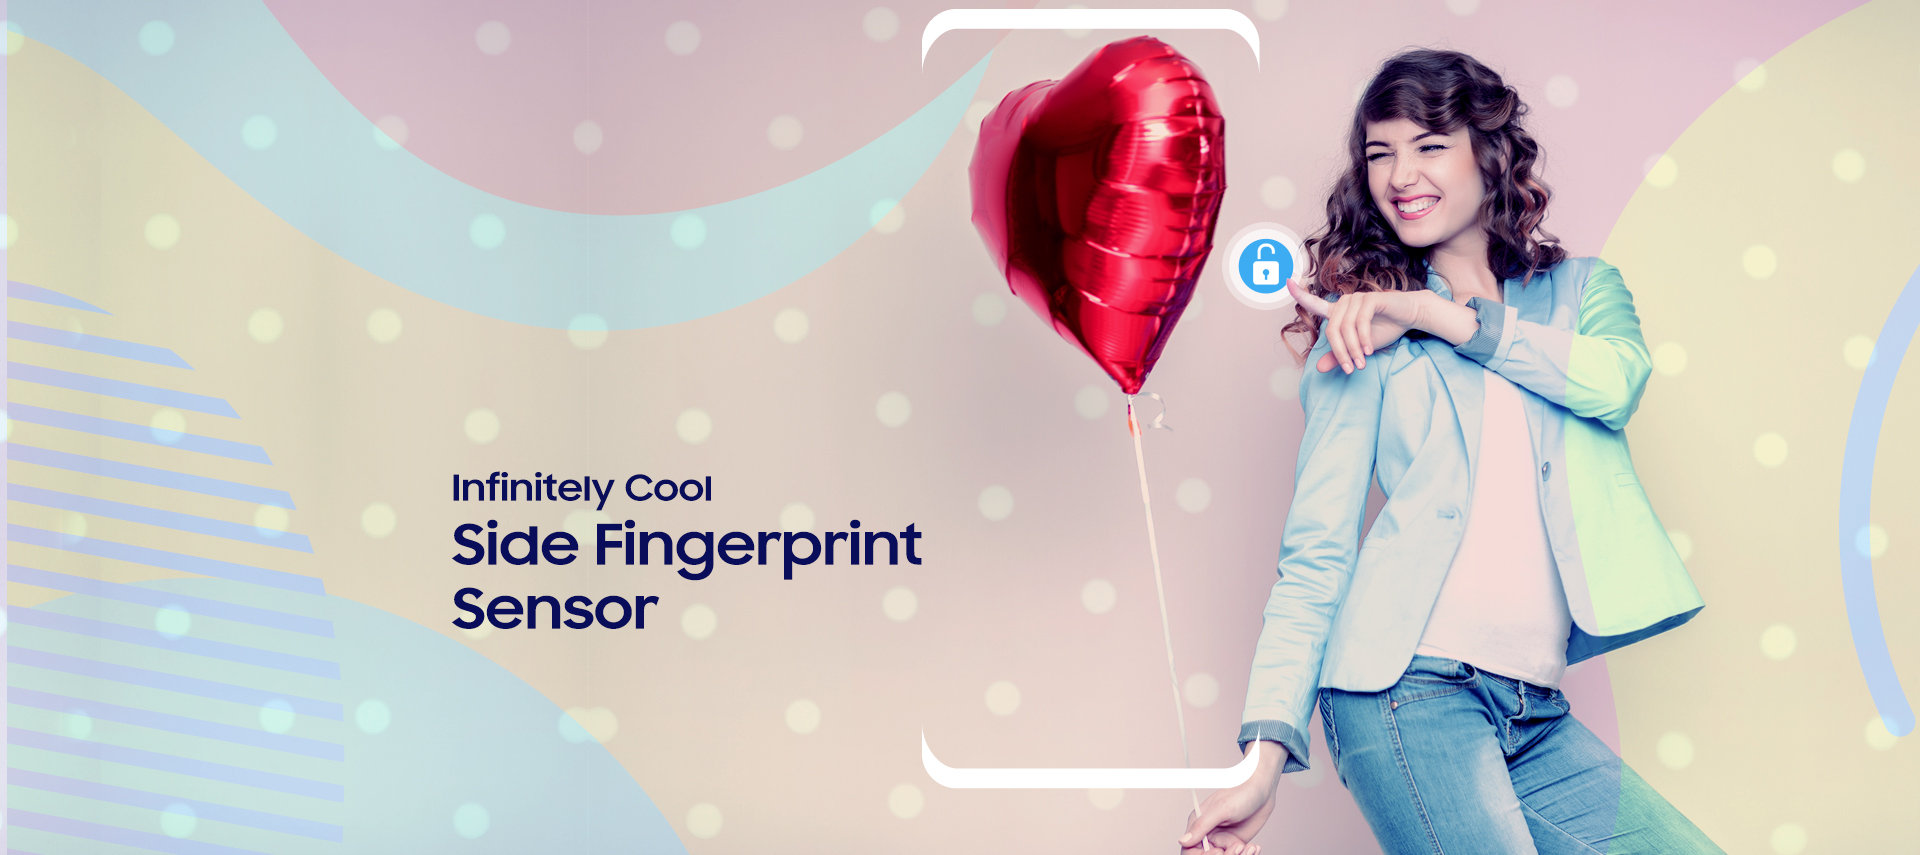 An advertisement for the Samsung Galaxy J6 Plus with a woman pointing at the side of the device, suggesting it will have a side-mounted fingerprint sensor.